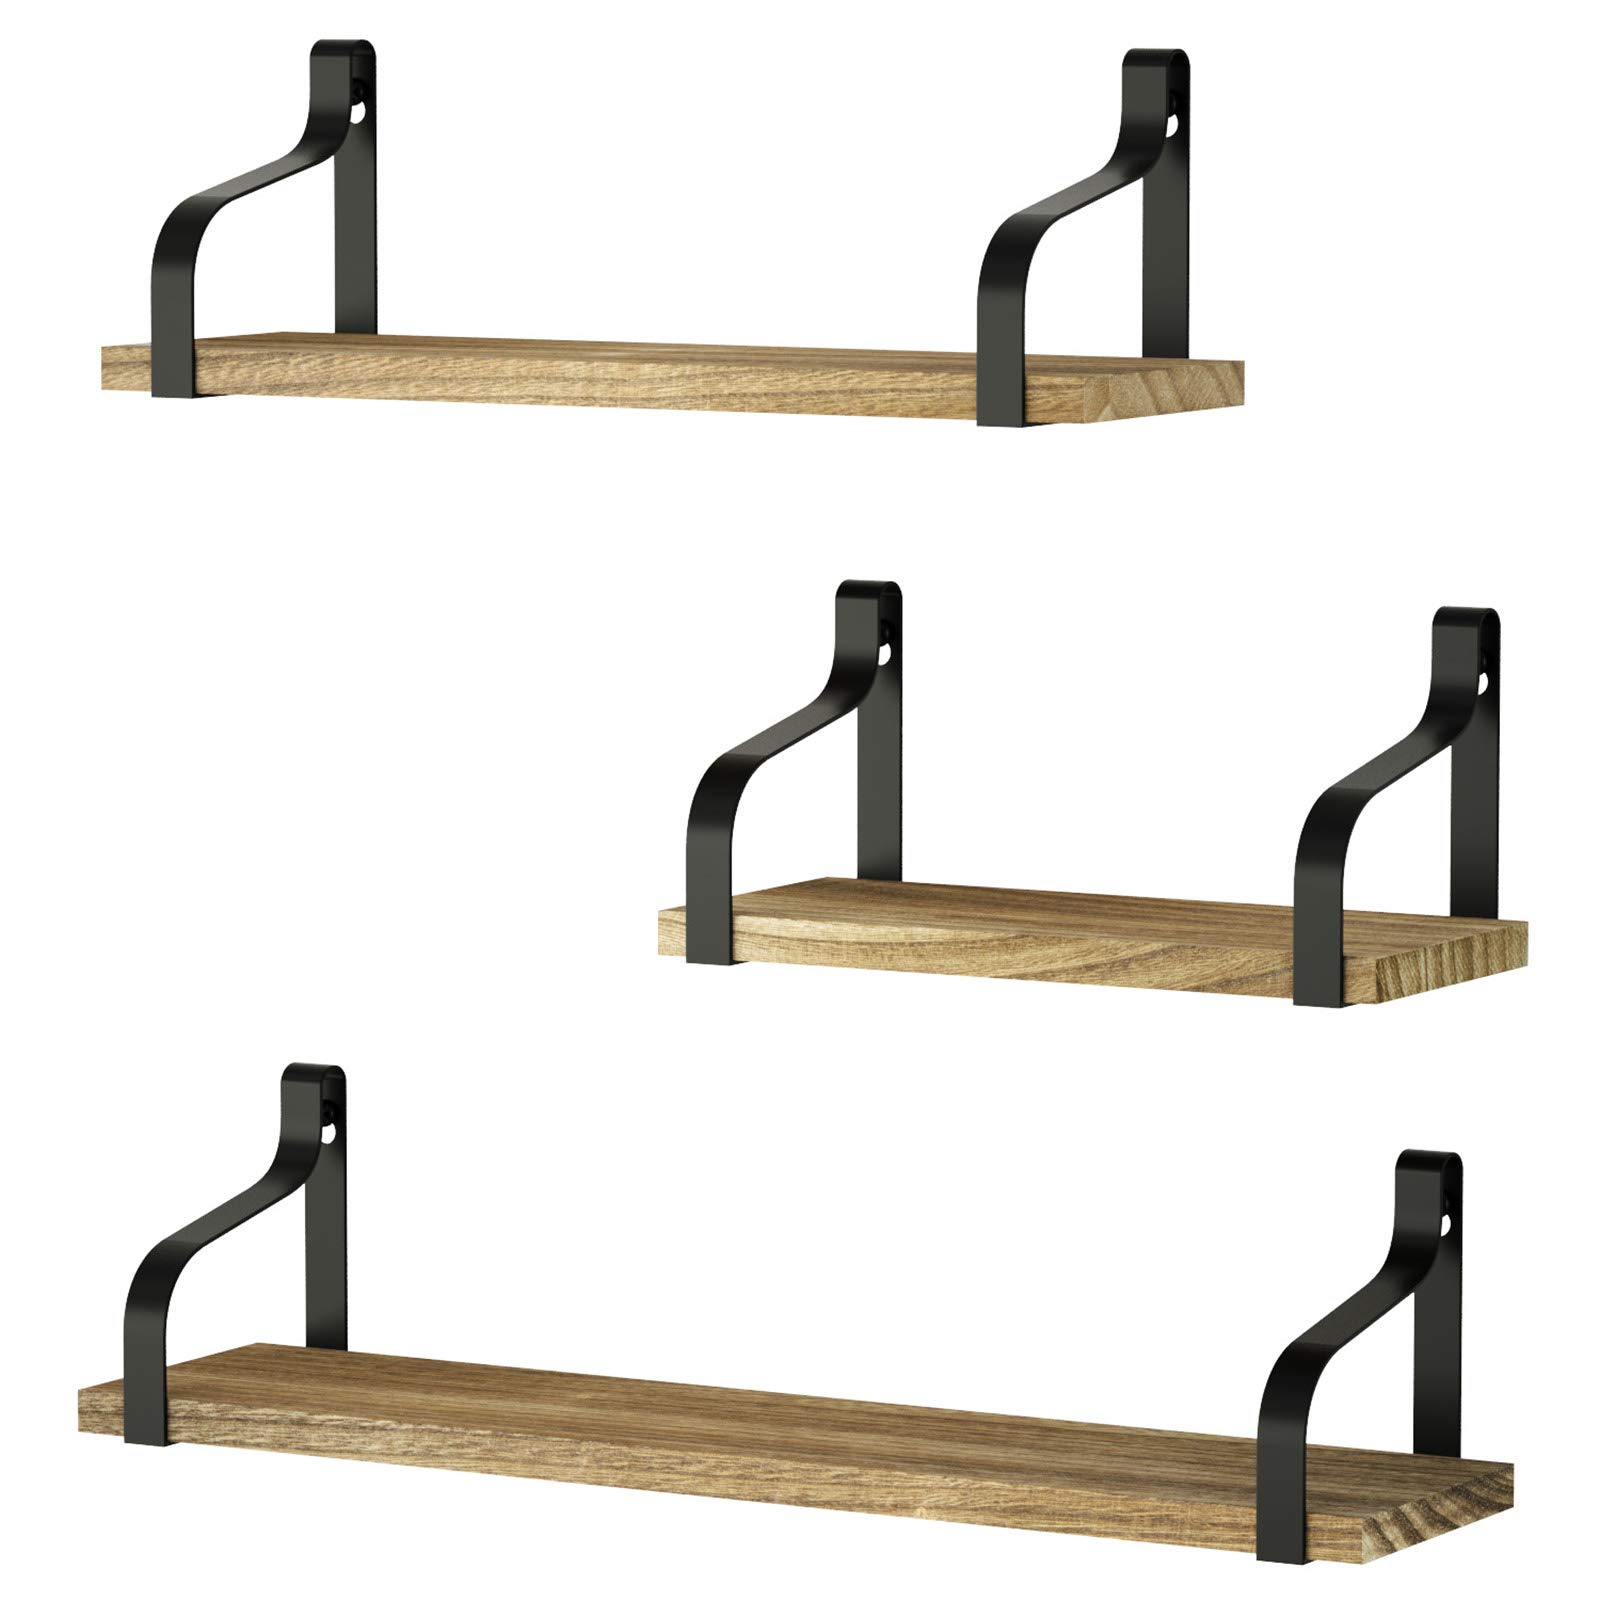 3-Ct Wall Mounted Floating Shelves (Carbonized Black) $14 + free shipping w/ Prime or on $25+ $13.99